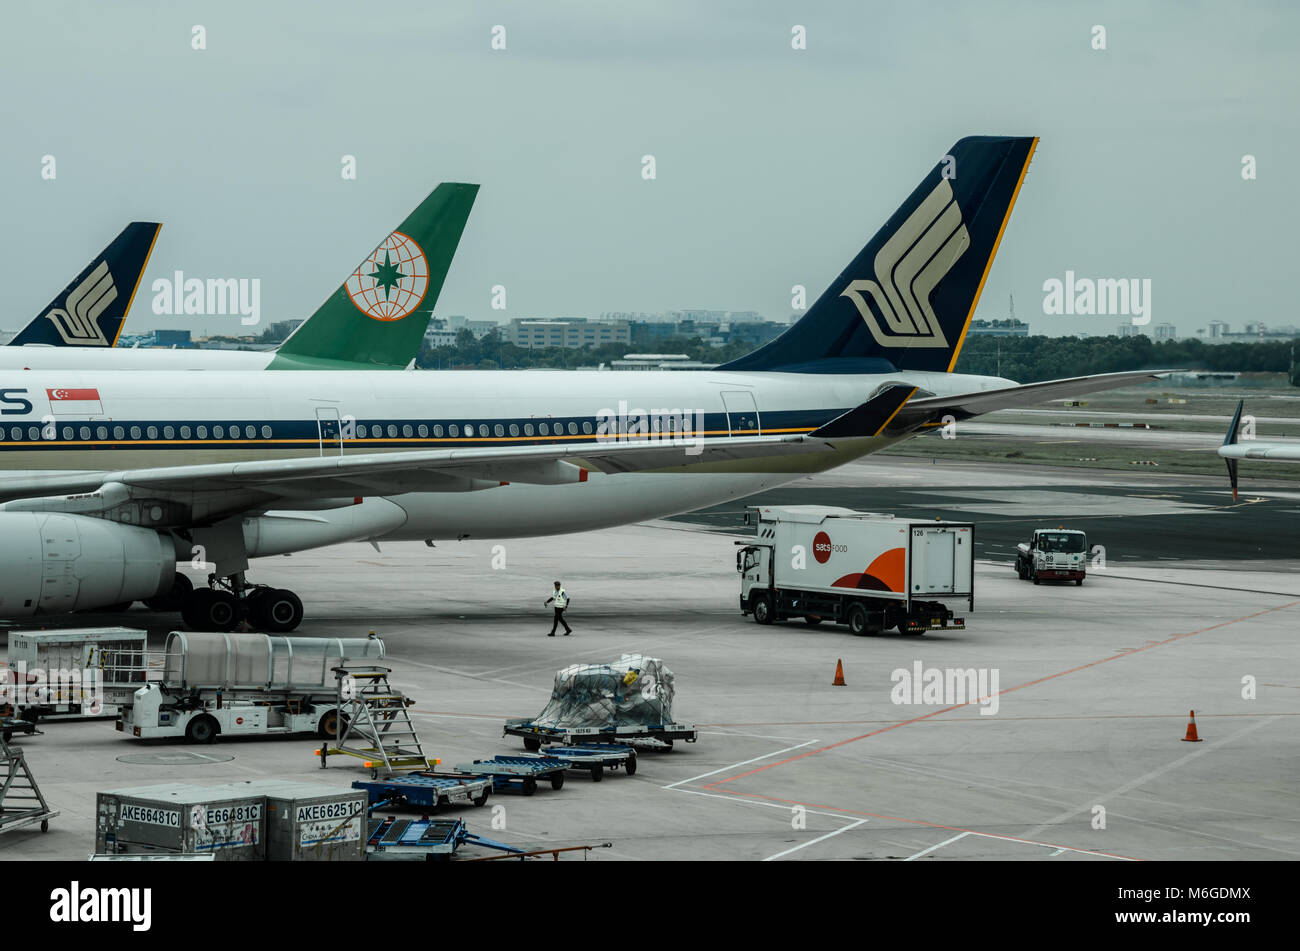 Singapore Airlines is the flag carrier airline of Singapore with its hub at Singapore Changi Airport. The airline was famous for its top notch service Stock Photo